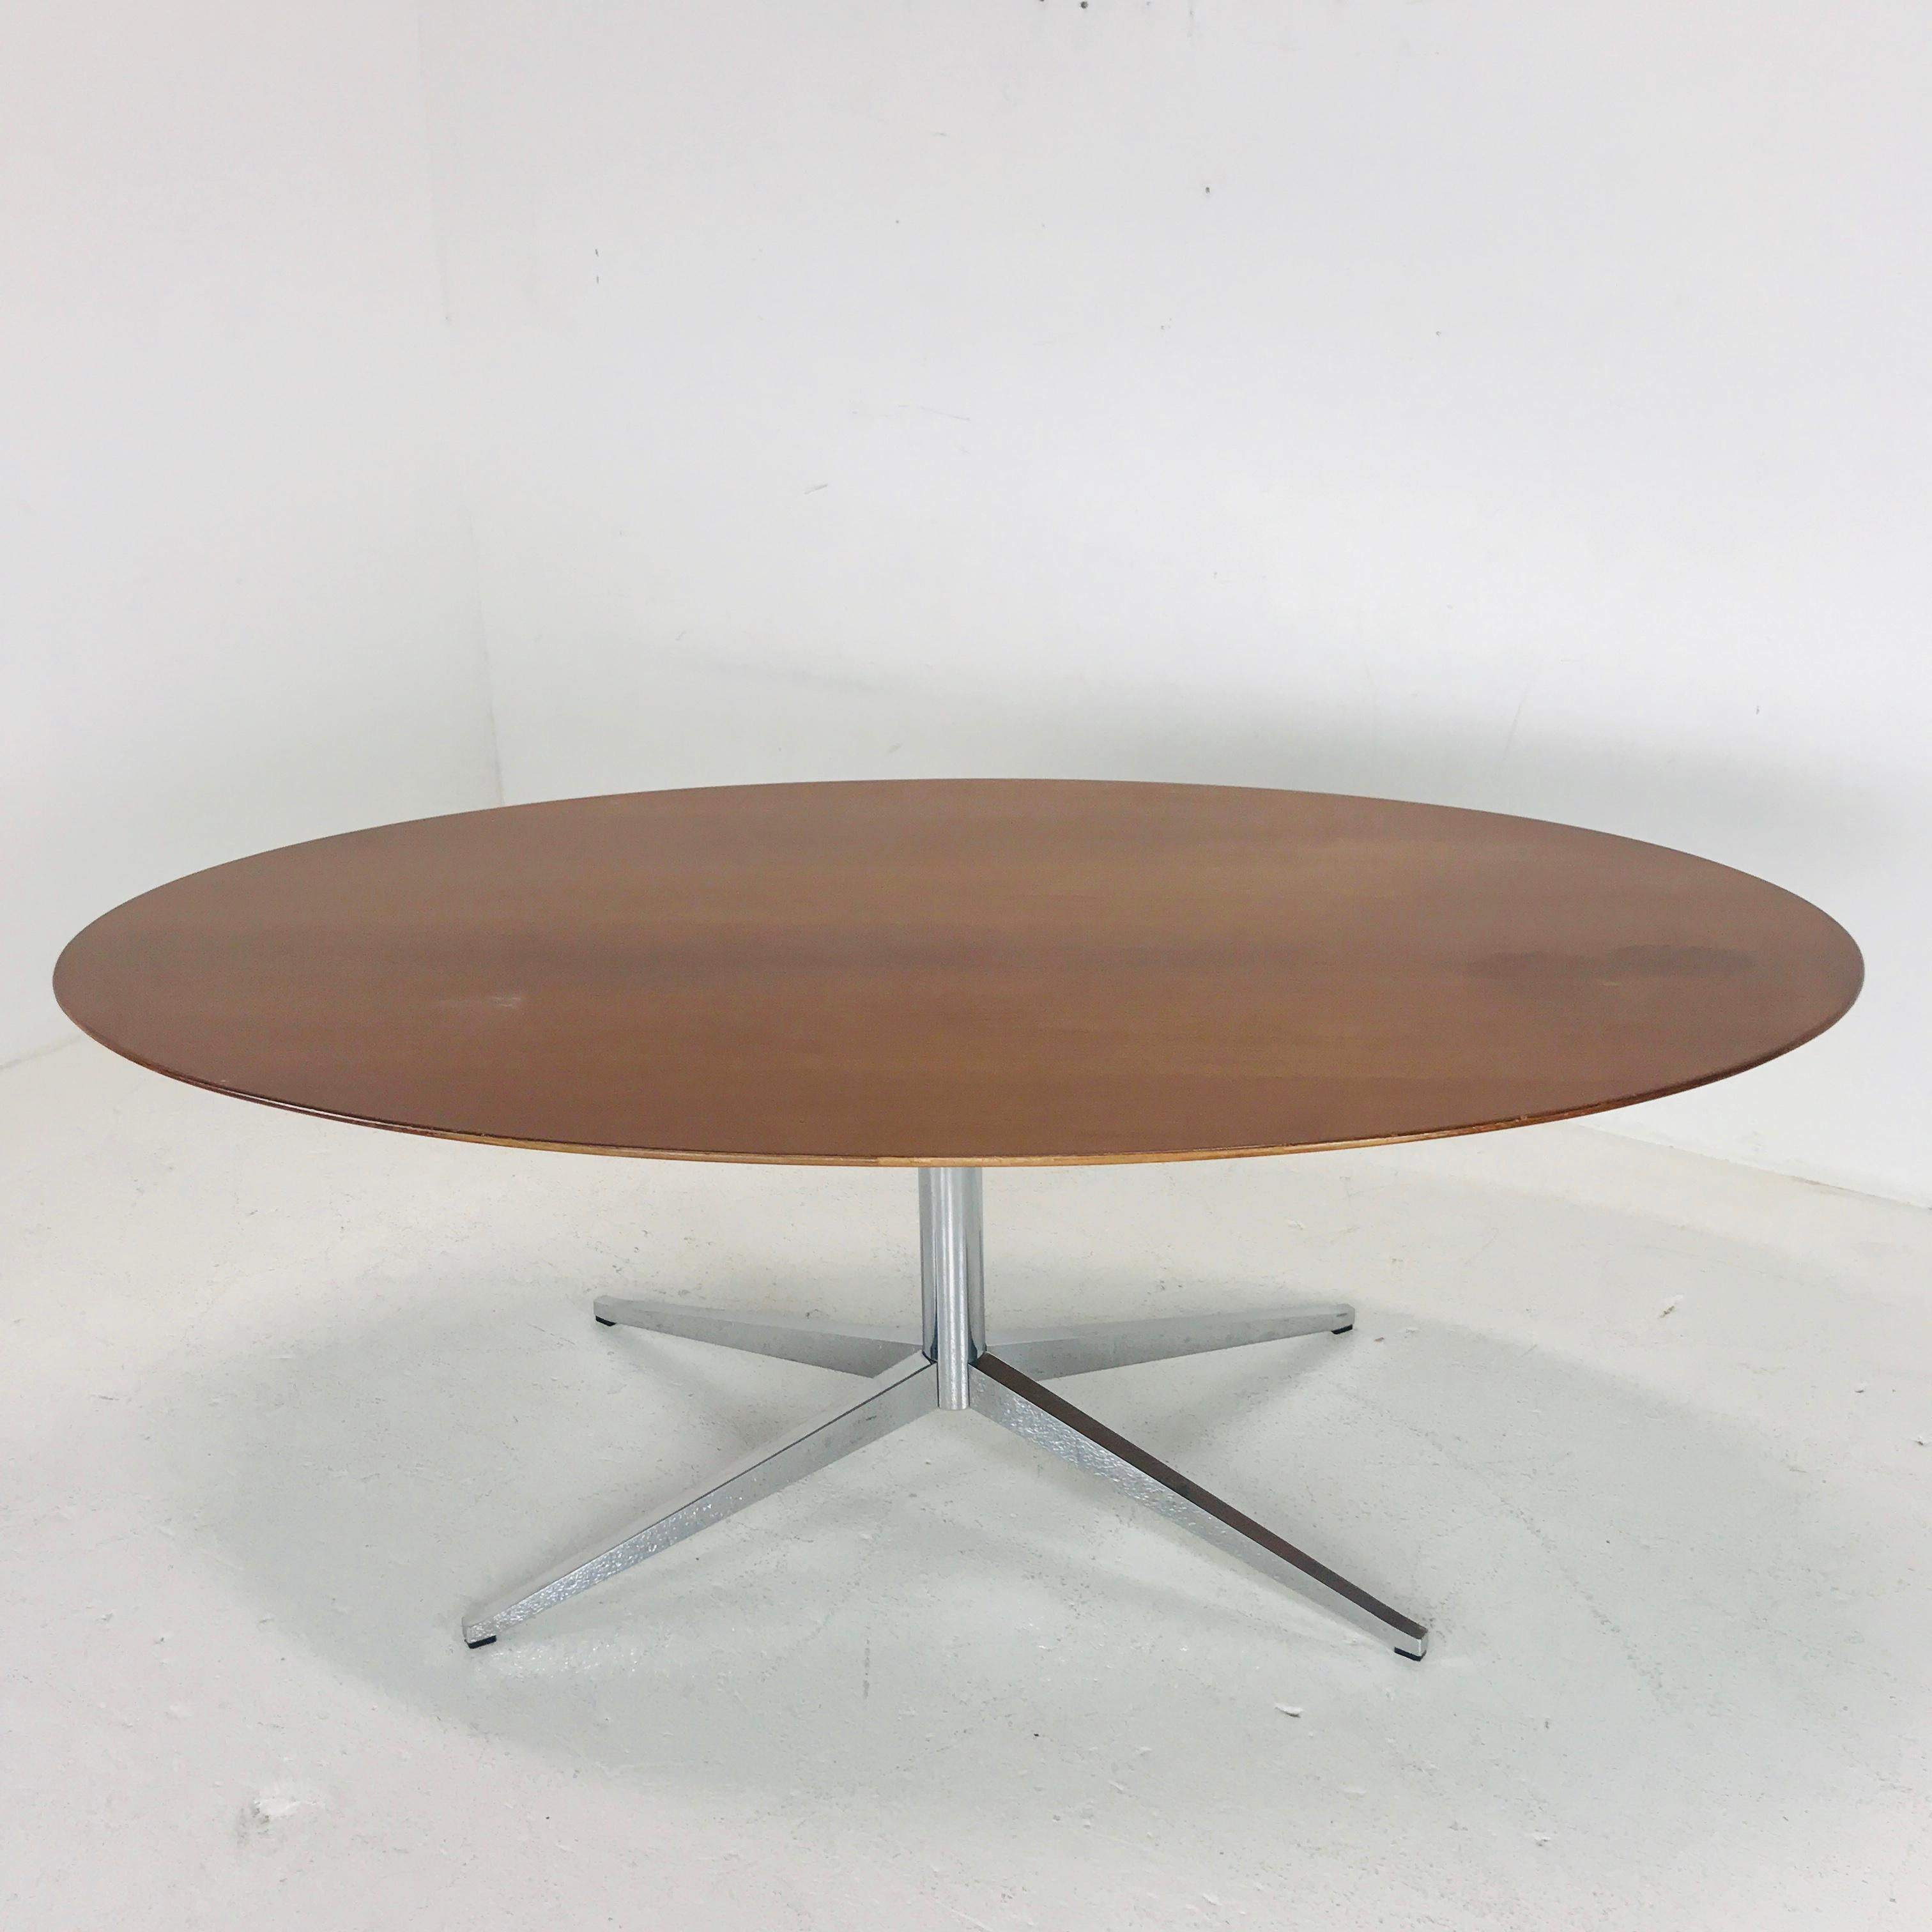 American Florence Knoll Dining Table/Desk/Conference Table